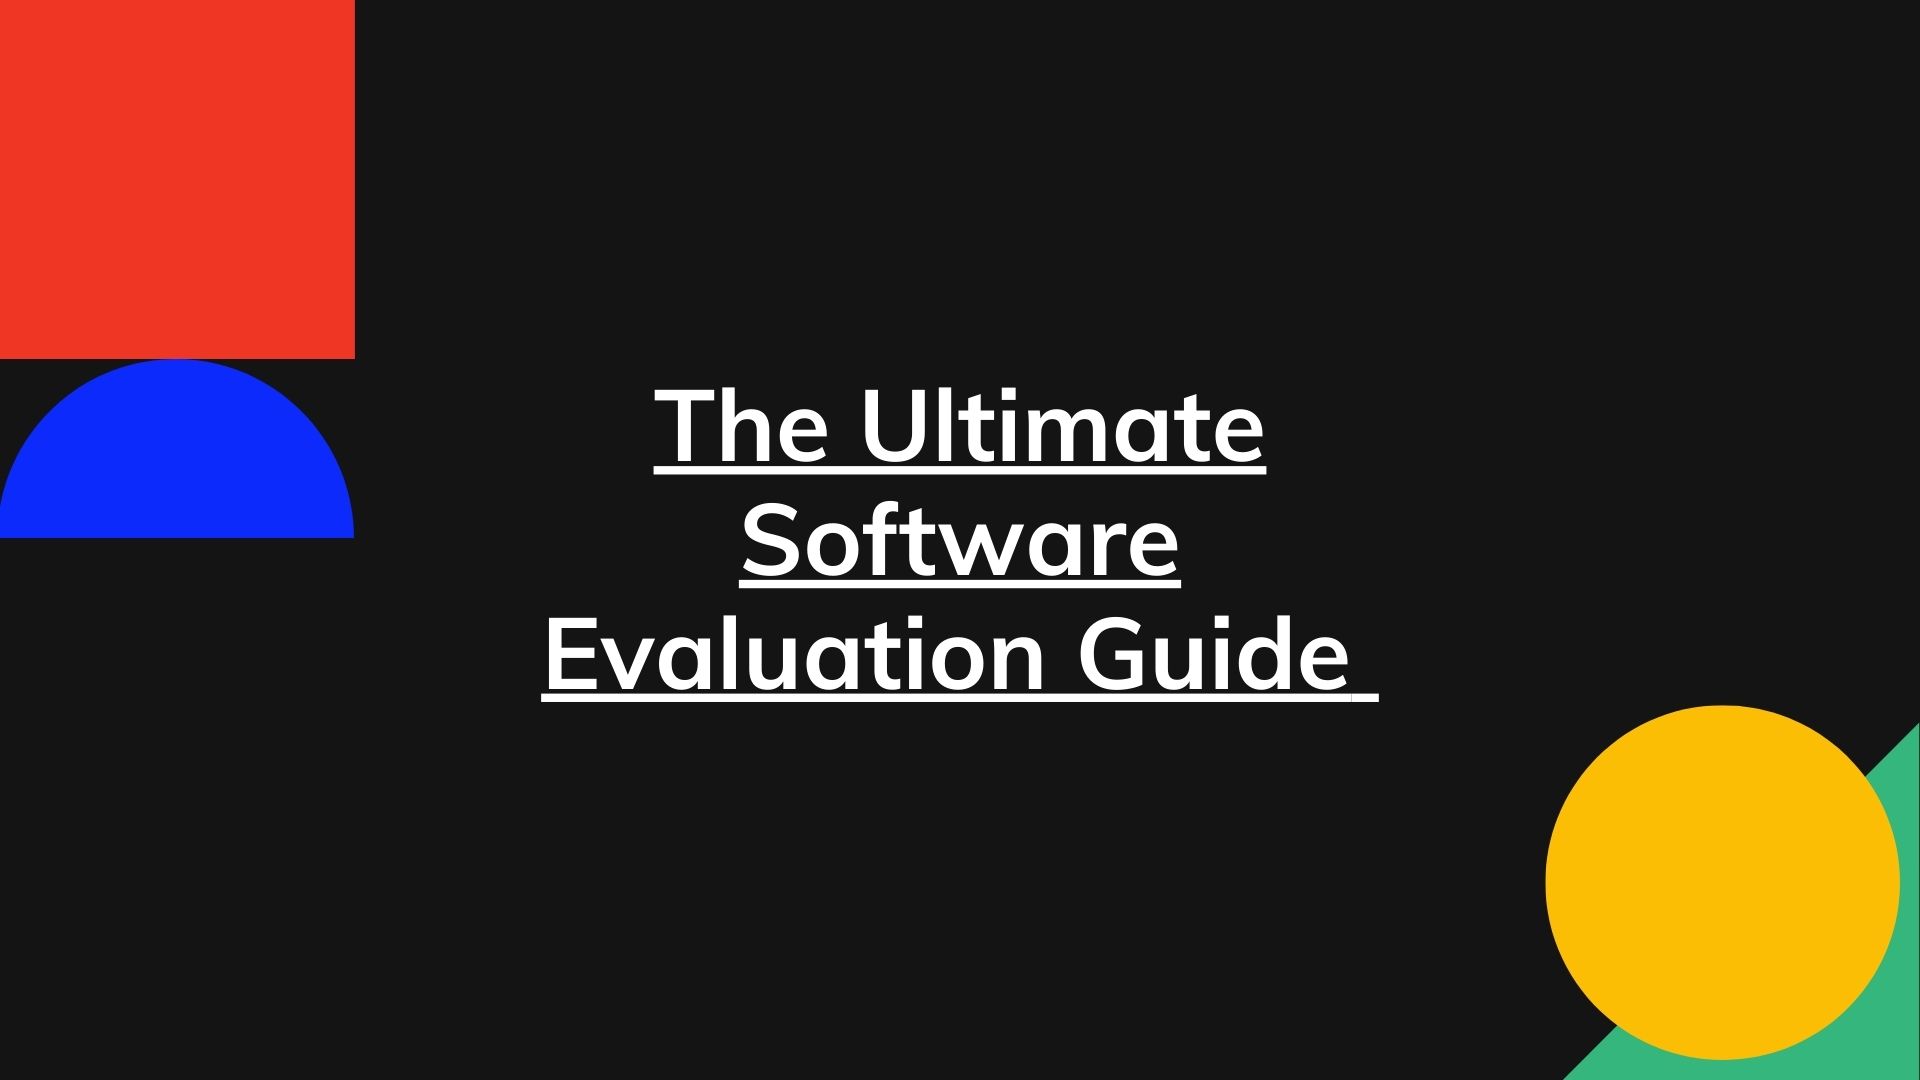 The Ultimate Software Evaluation Guide